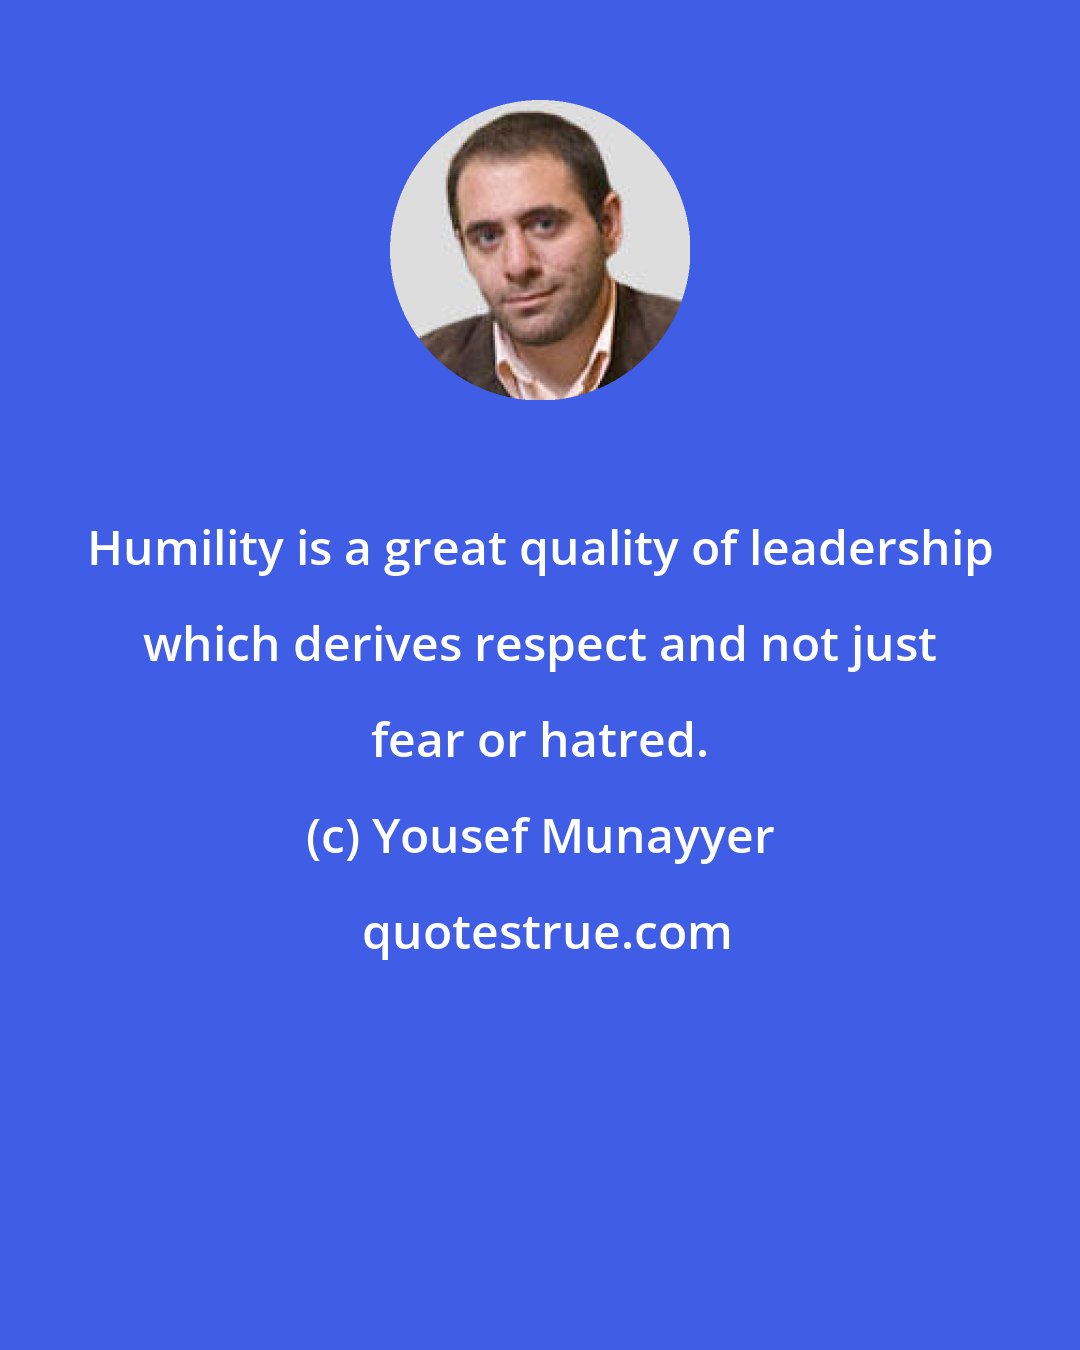 Yousef Munayyer: Humility is a great quality of leadership which derives respect and not just fear or hatred.